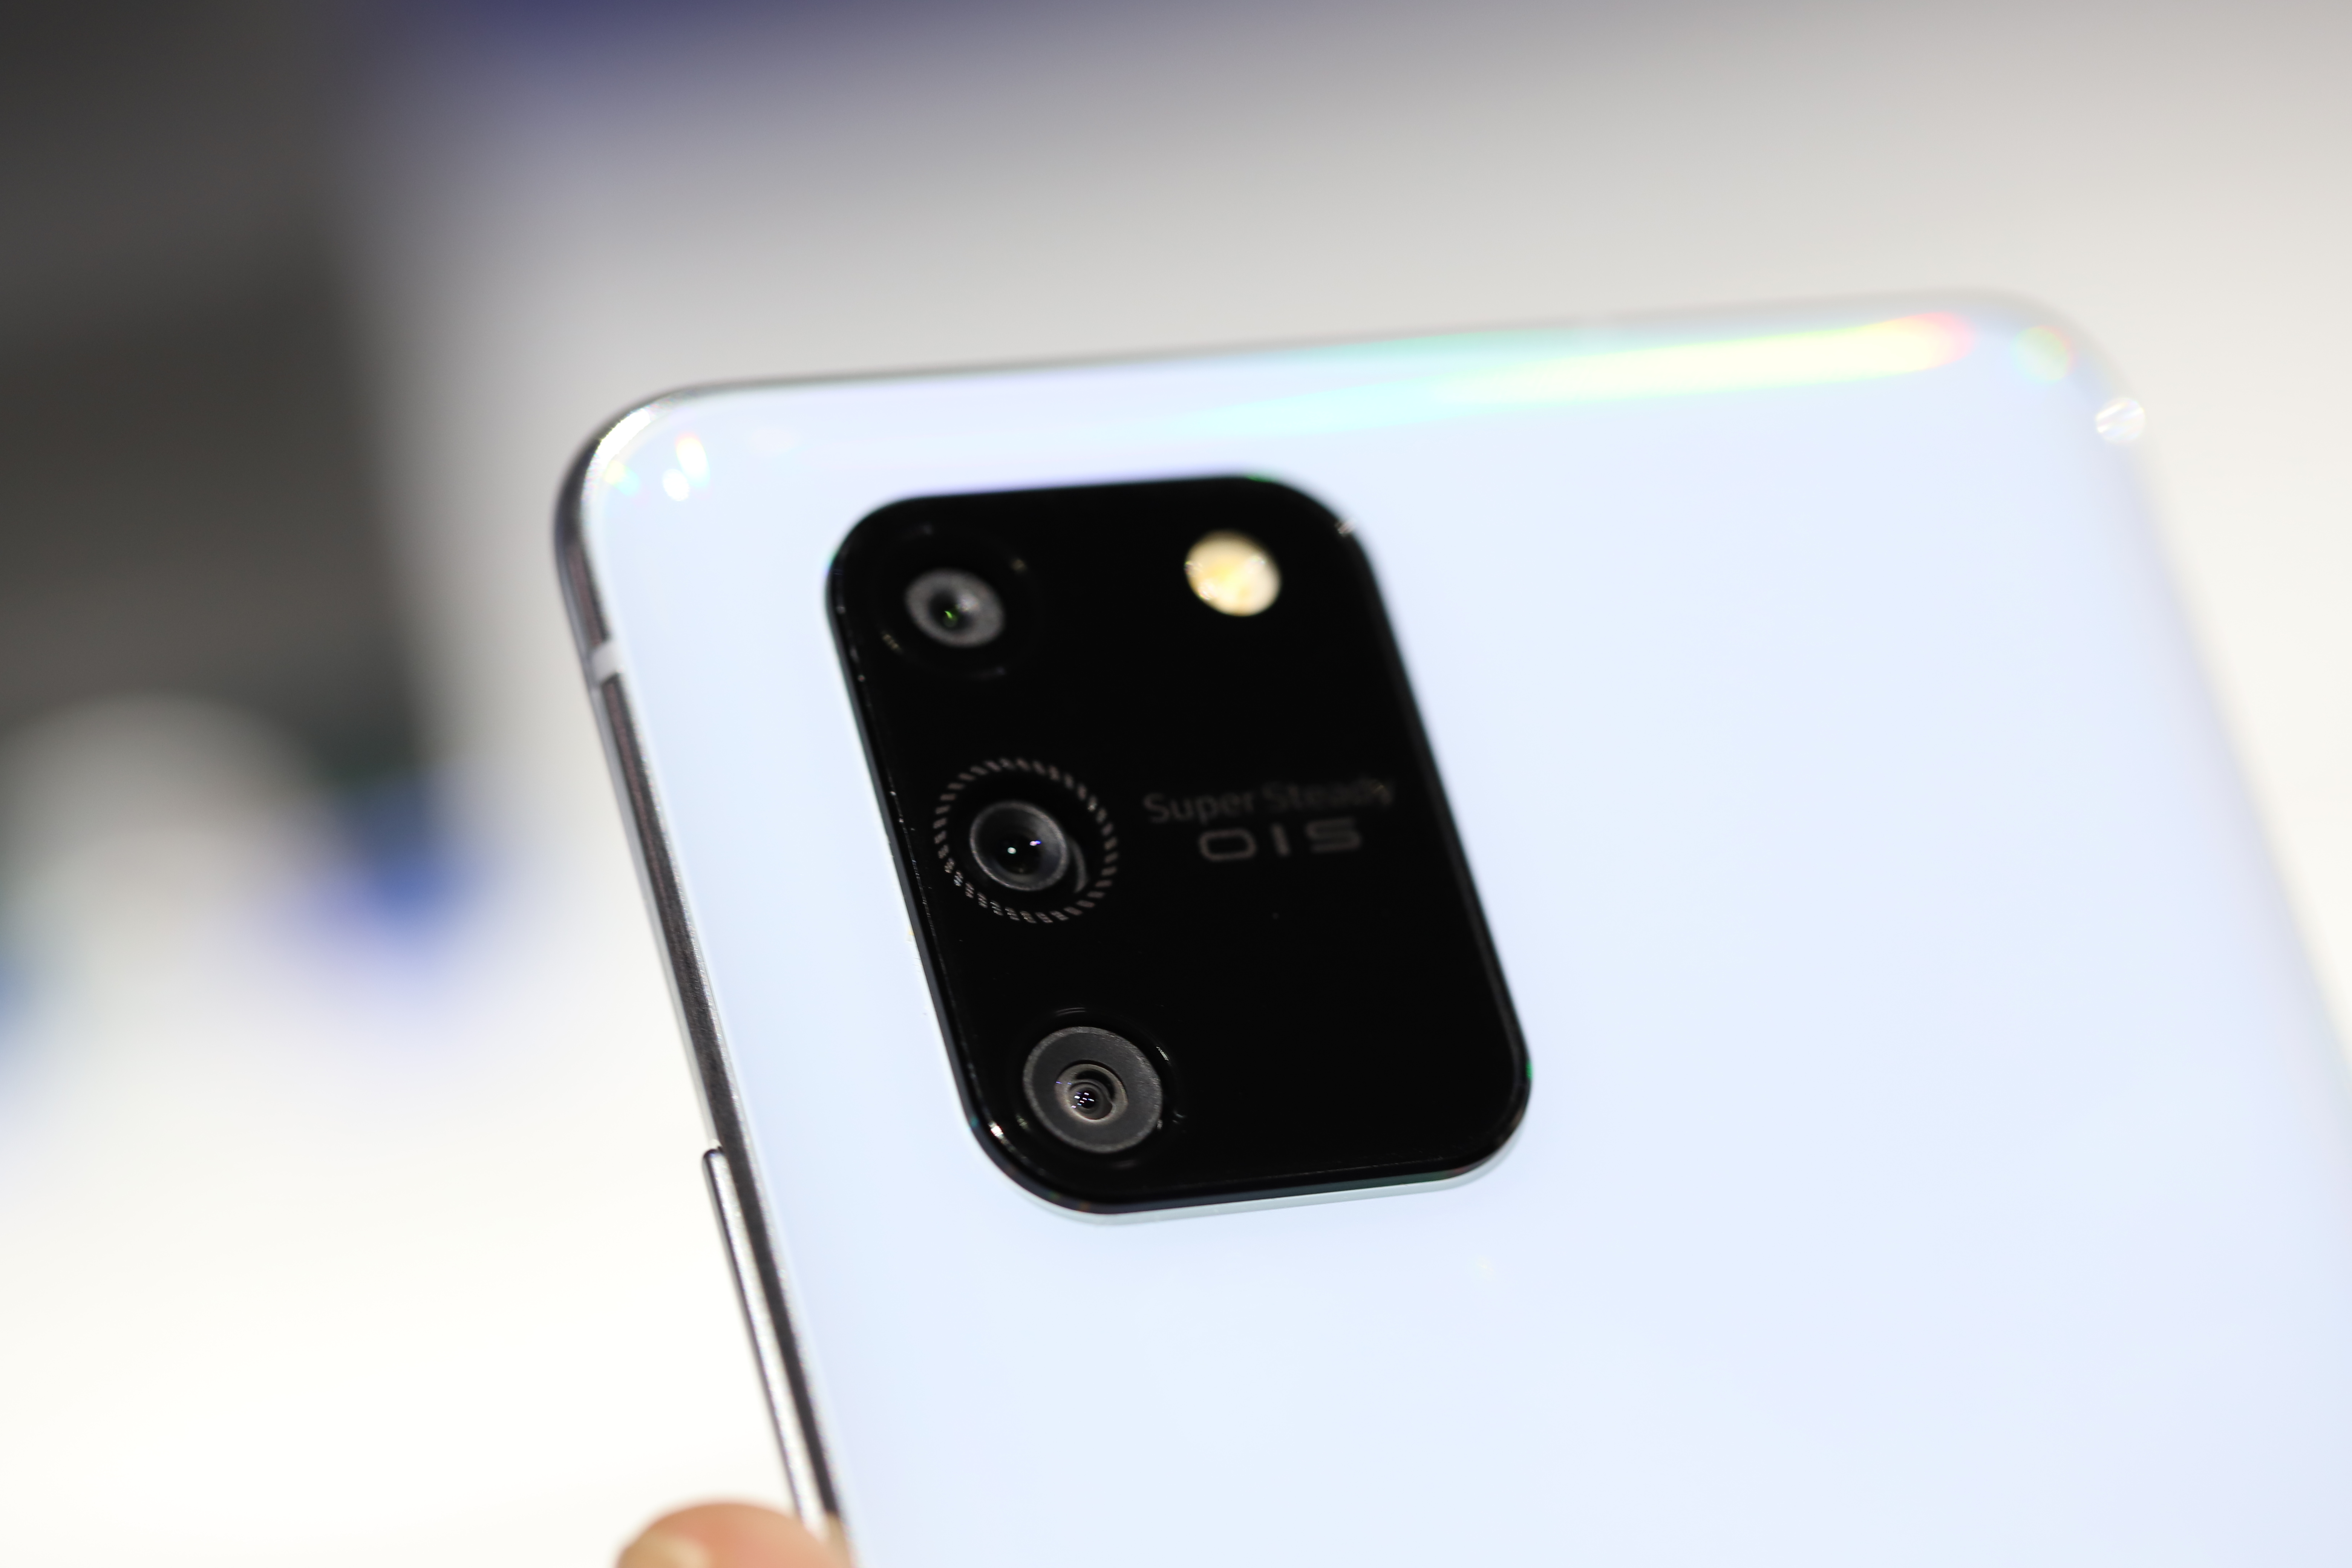 Samsung S Lite Devices Bring The Headphone Jack To Flagship Design Sort Of Internet Technology News - rotate resize tool headphone transparent roblox